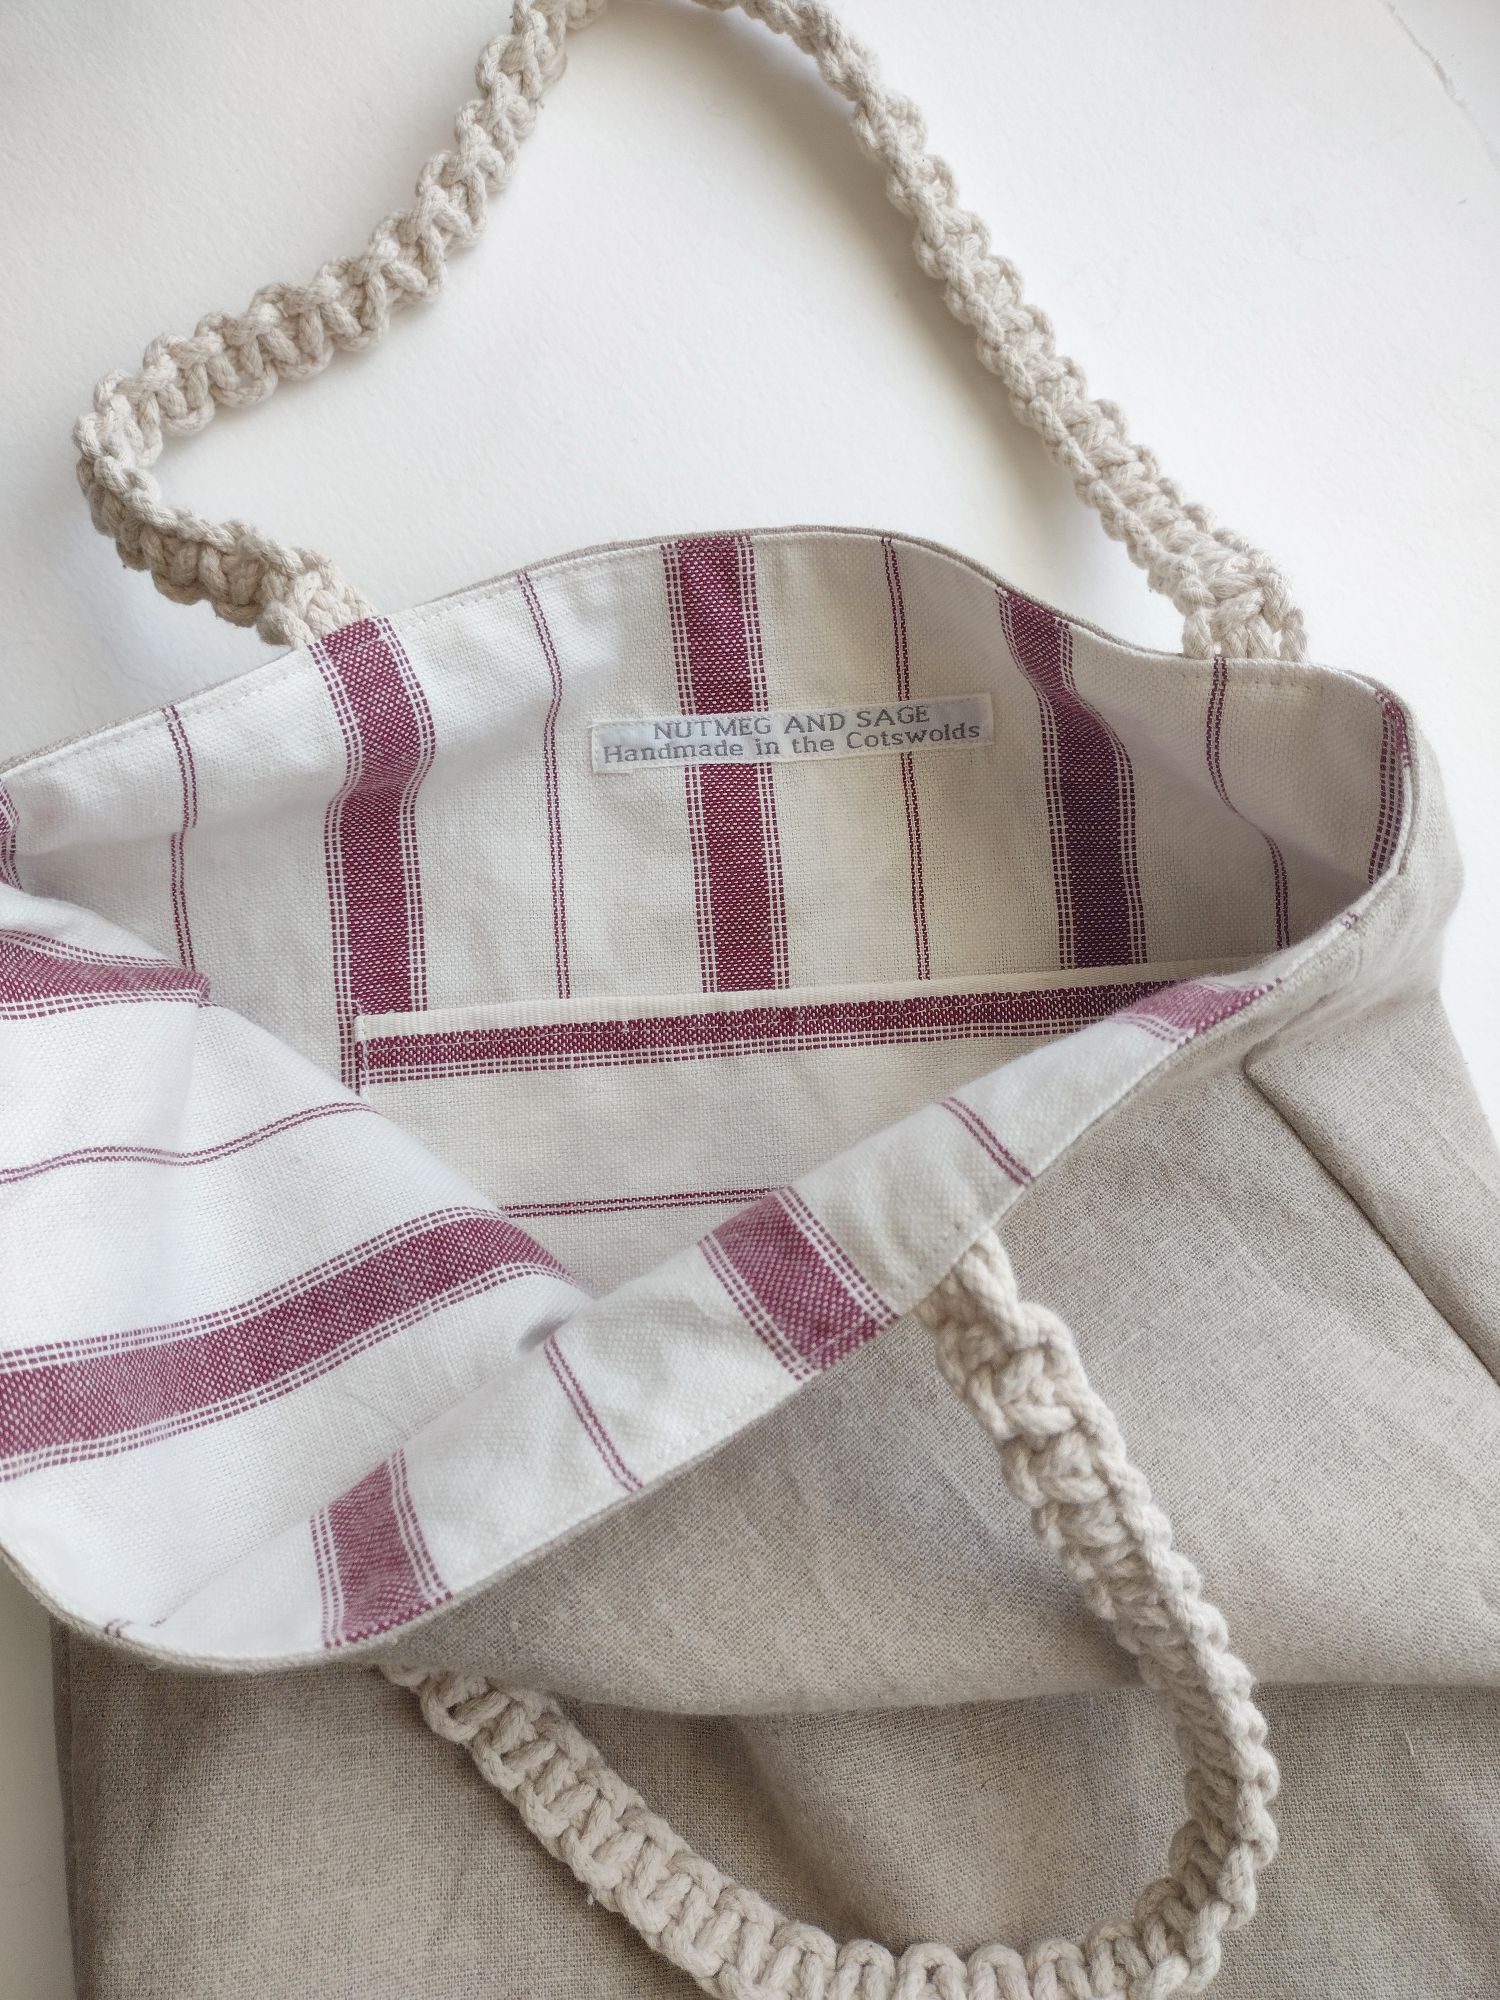 Linen tote with macrame handles